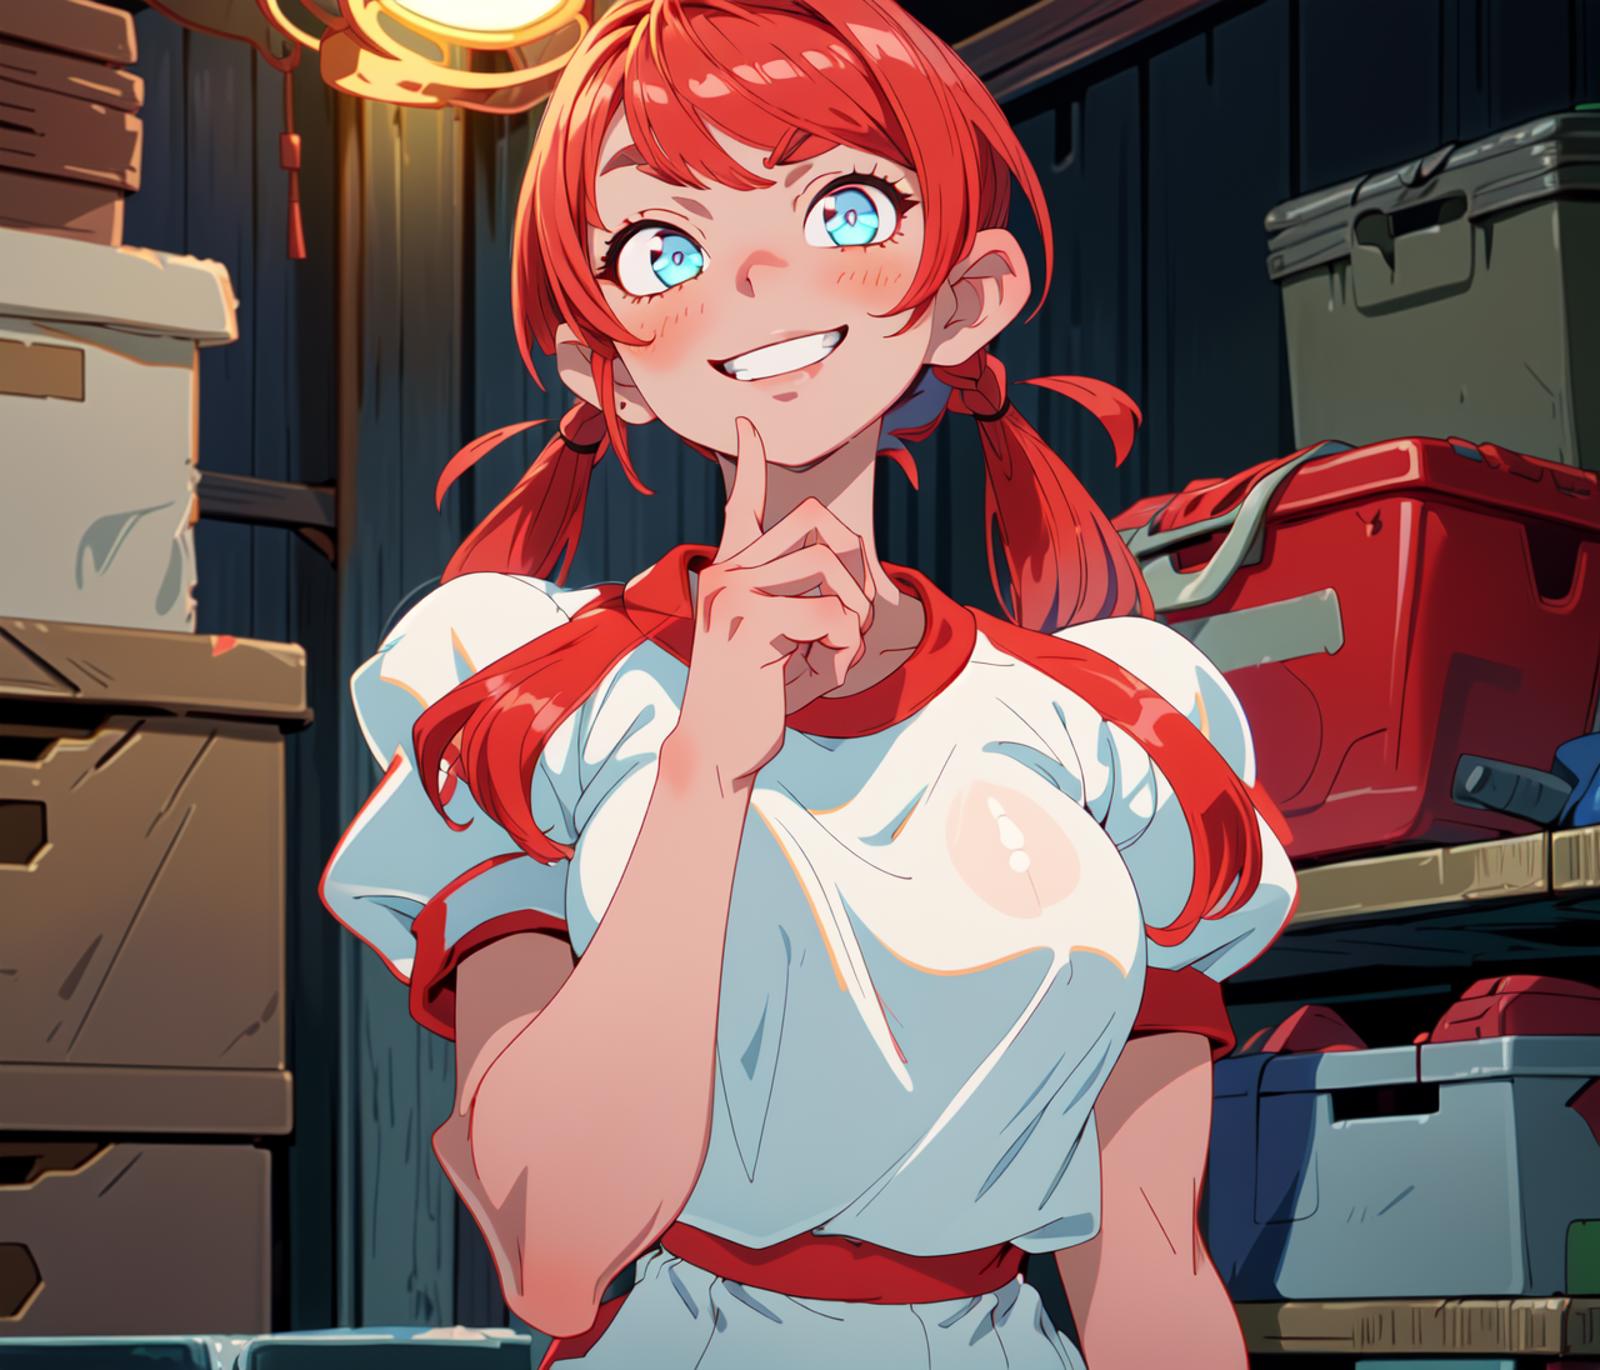 A cute cartoon girl wearing a red bow and a white shirt with a red apron.